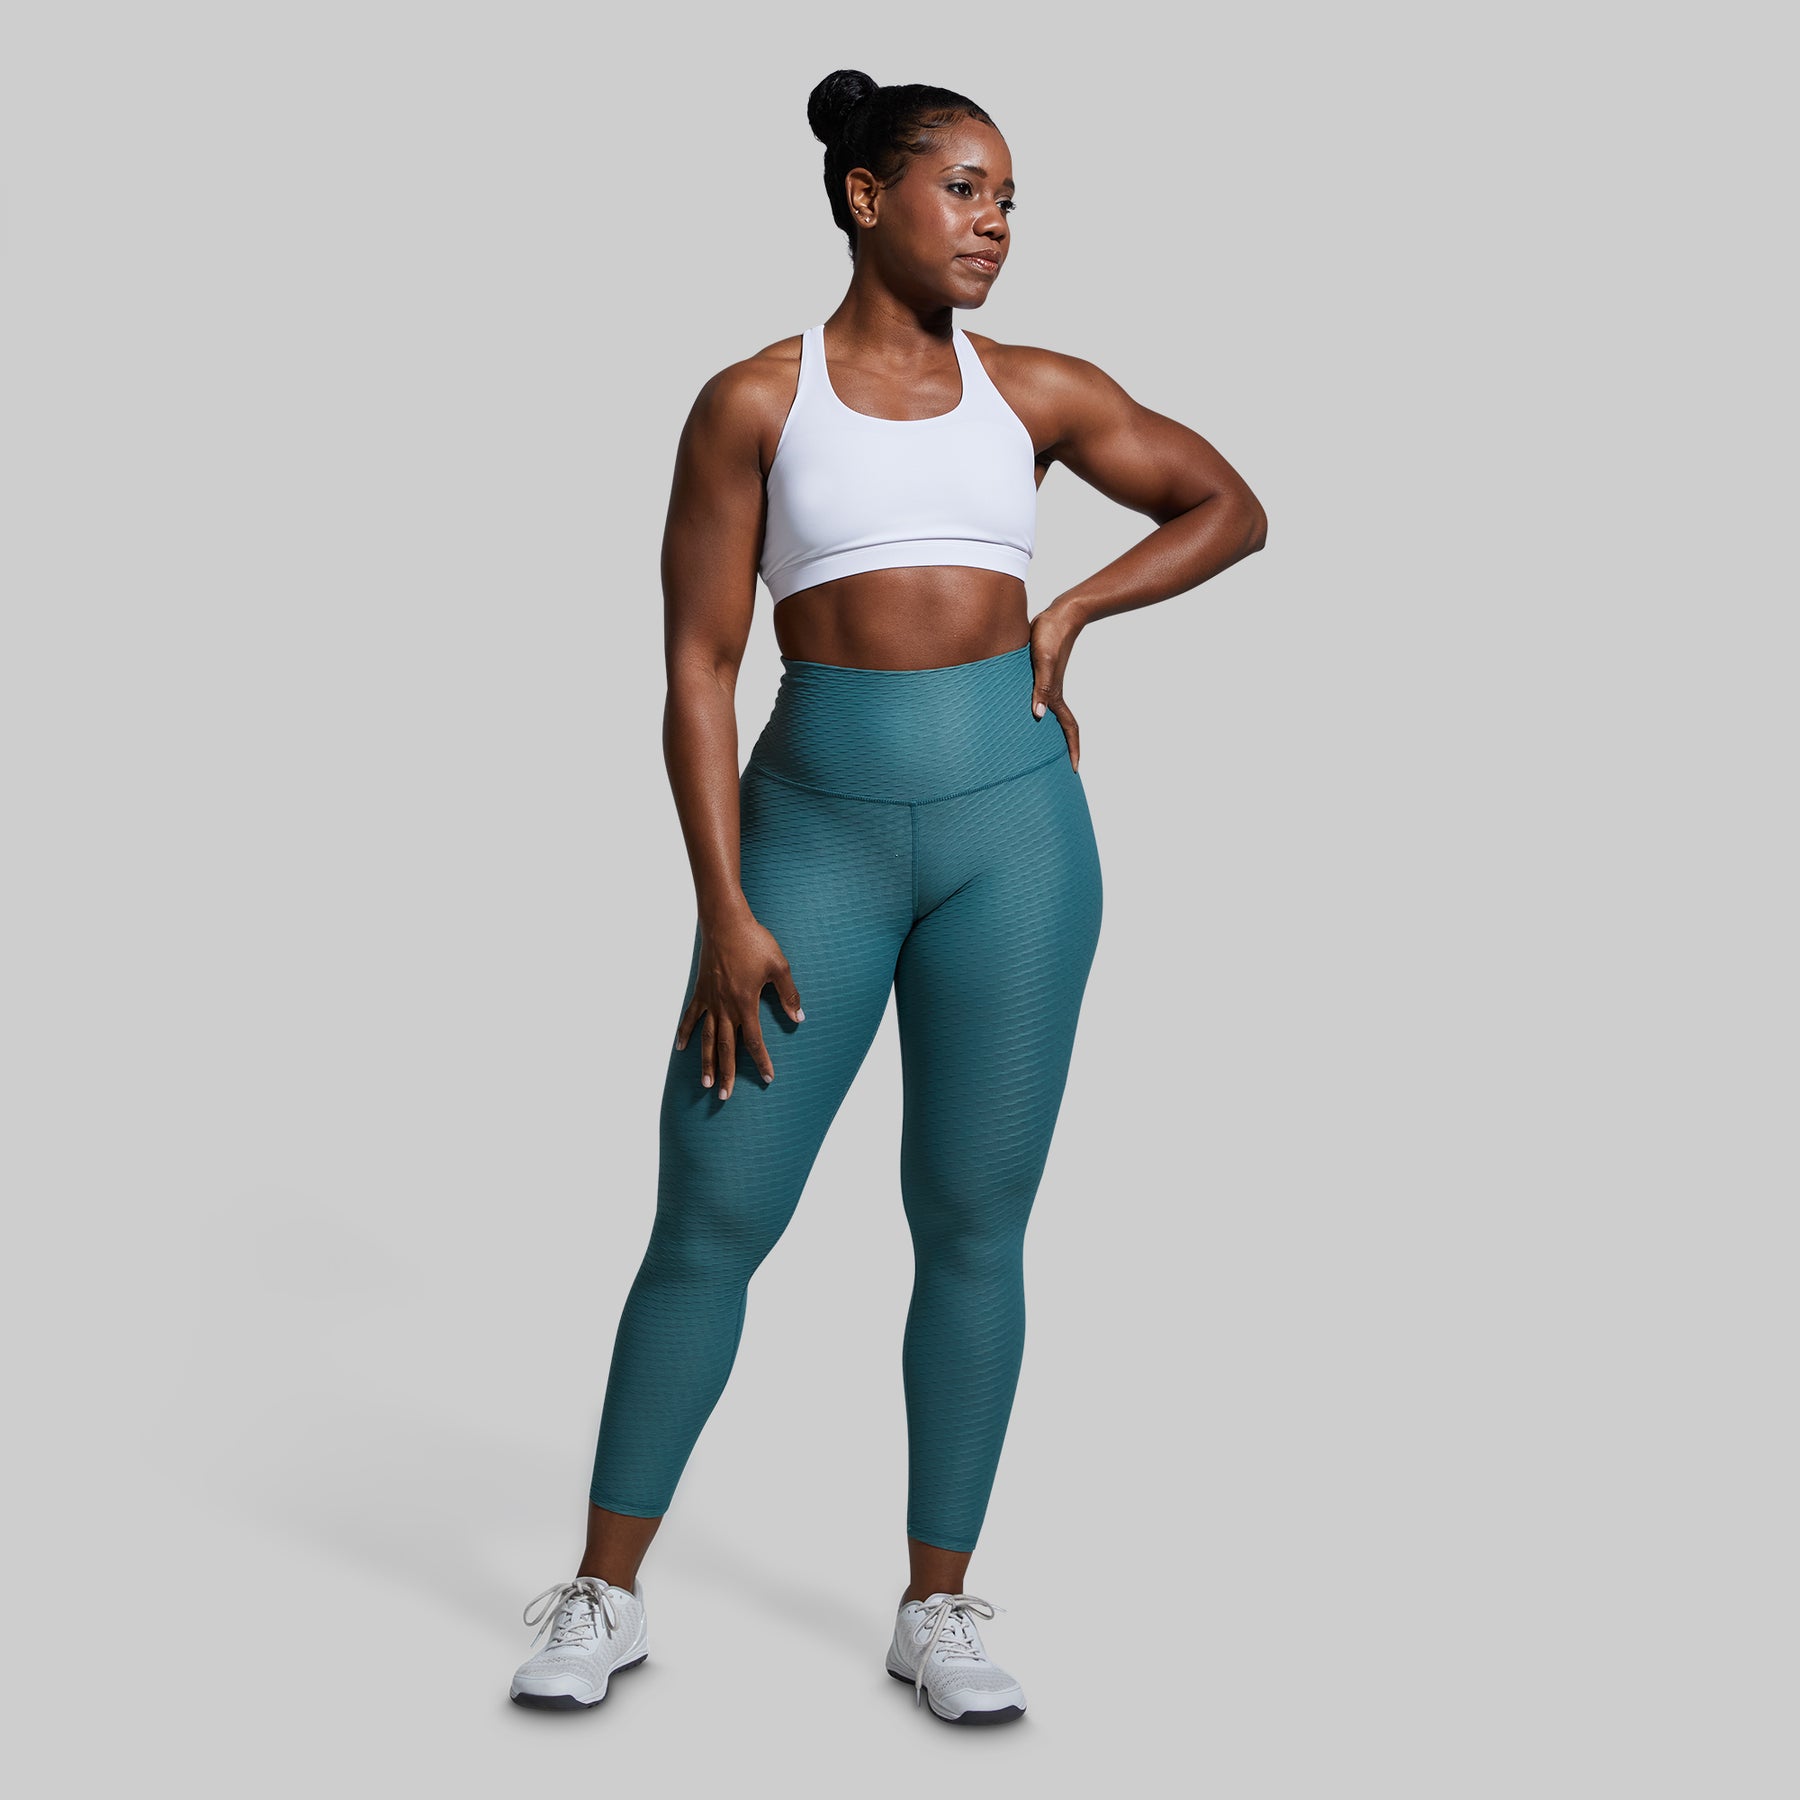 Paragon Leggings for Sale in Los Angeles, CA - OfferUp